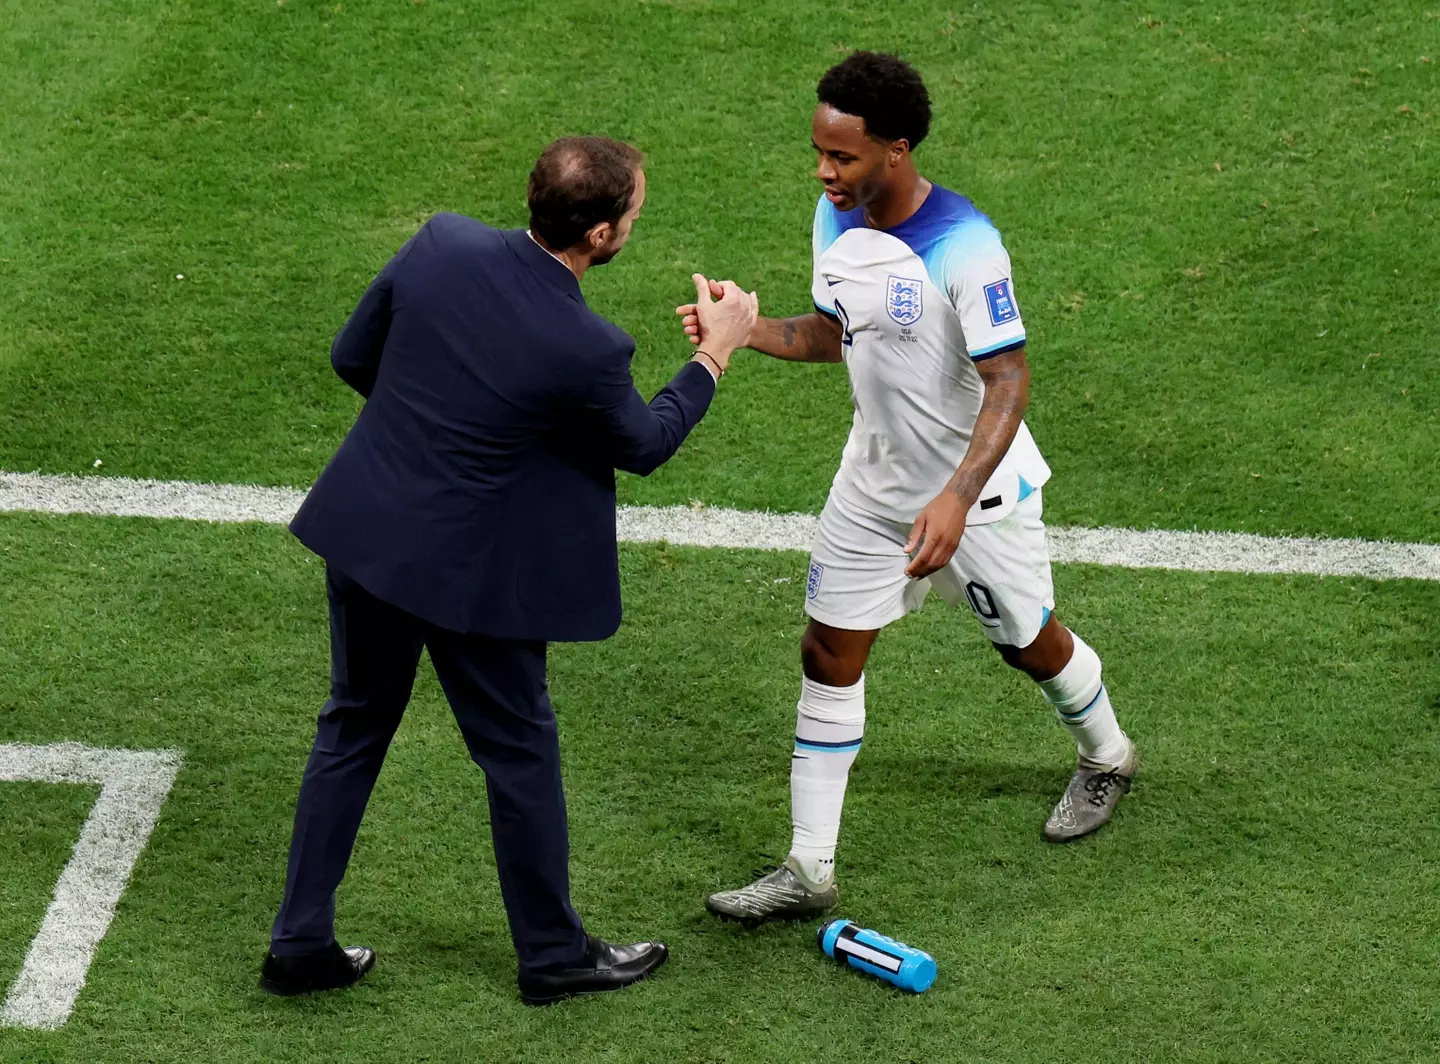 Sterling embraces Southgate after being substituted against Iran. (Image